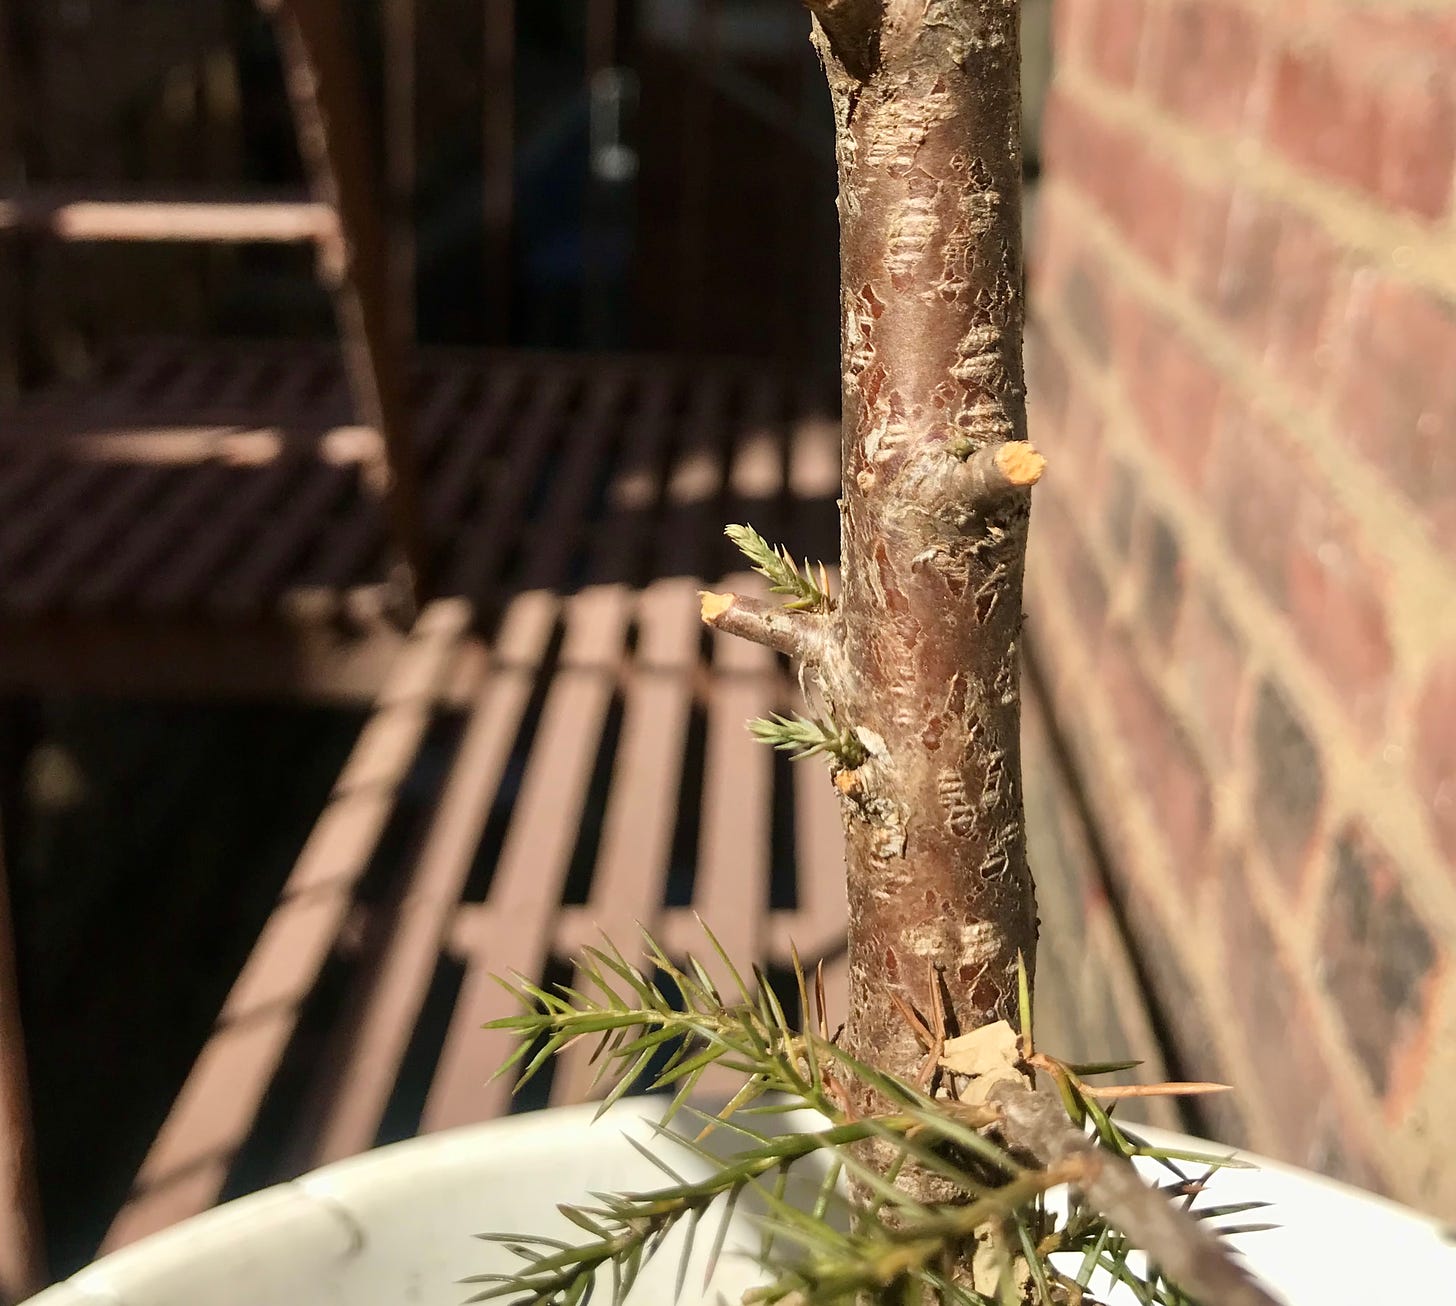 Image description: Eastern red cedar tree on fire escape. The branches are torn off from the squirrel attack, but new buds are shooting out of the trunk. End image description.